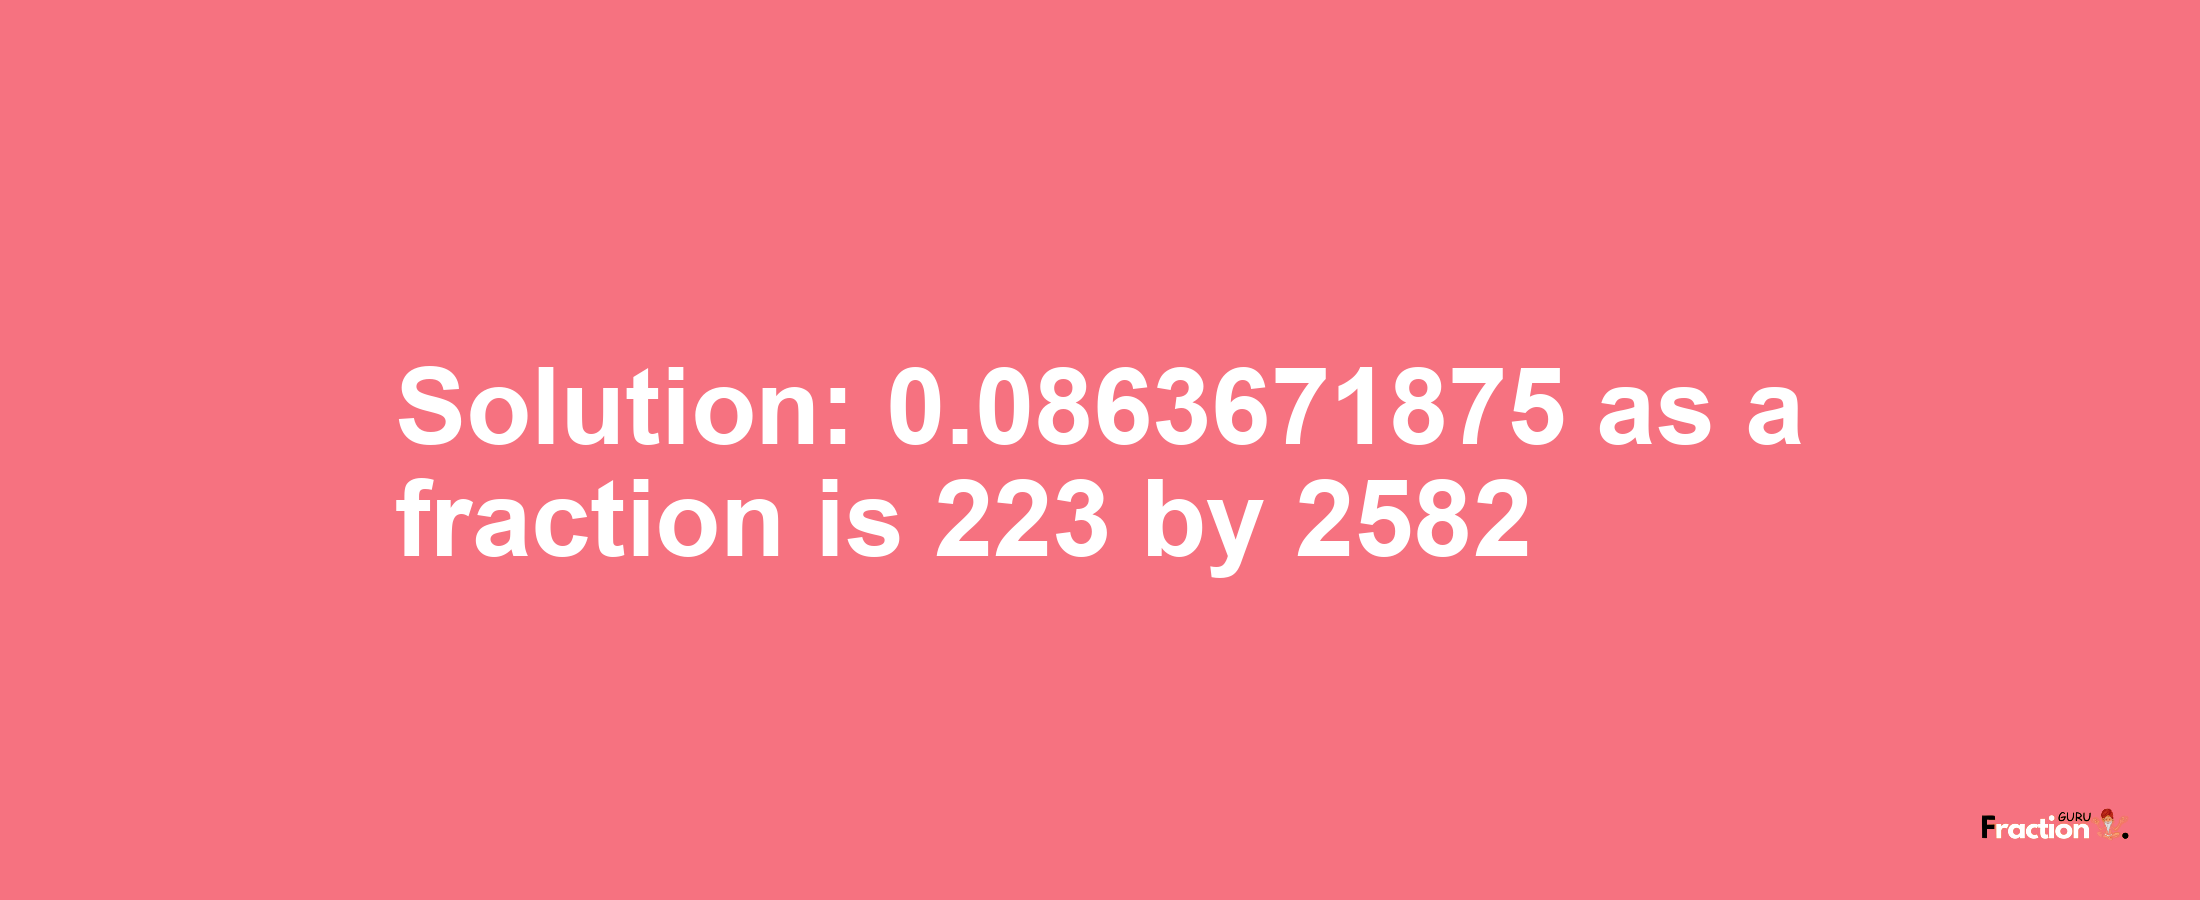 Solution:0.0863671875 as a fraction is 223/2582